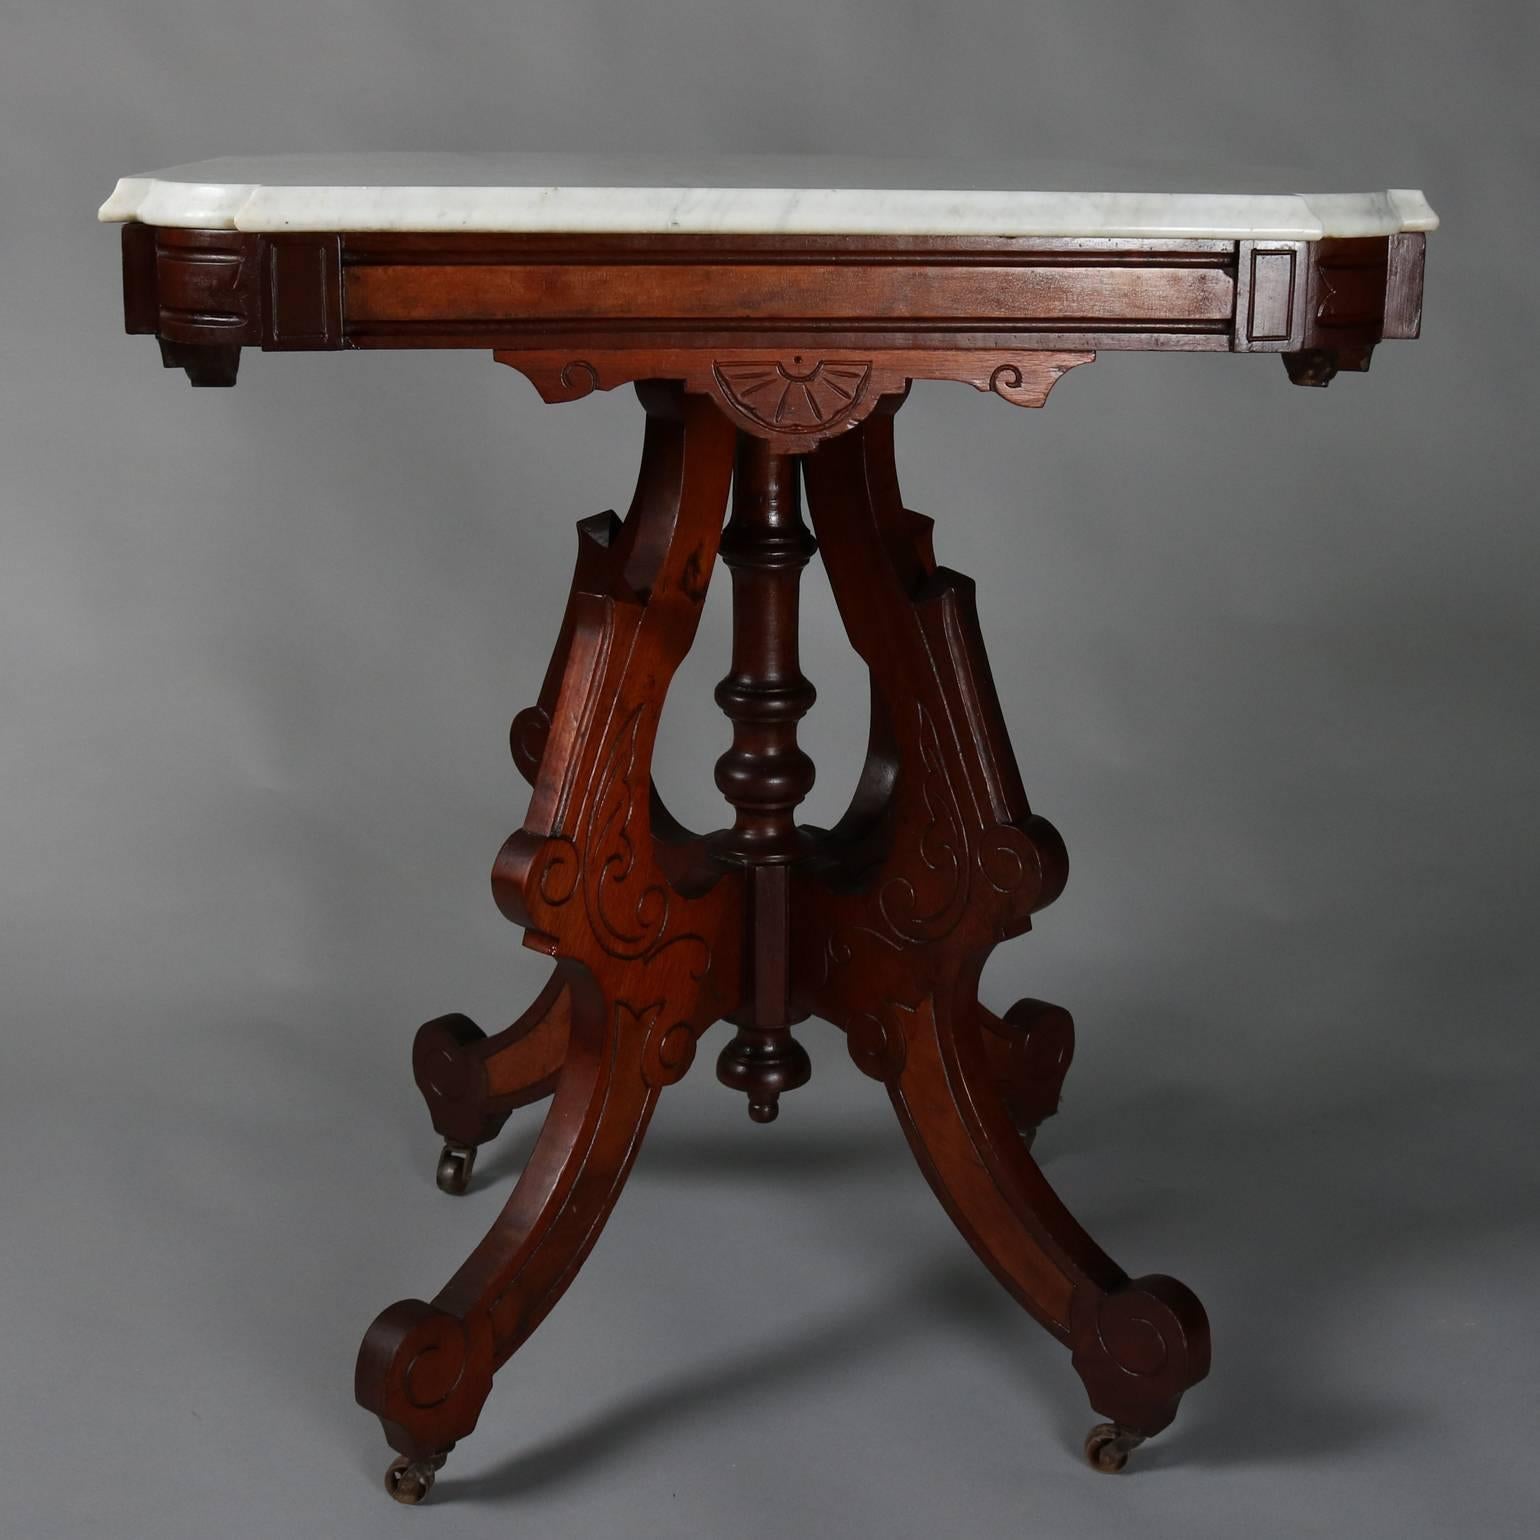 Antique Eastlake walnut side table features incised scroll and foliate decorated legs with central turned plinth supporting beveled marble top, circa 1880

Measures: 30" H x 29" W x 21" D.